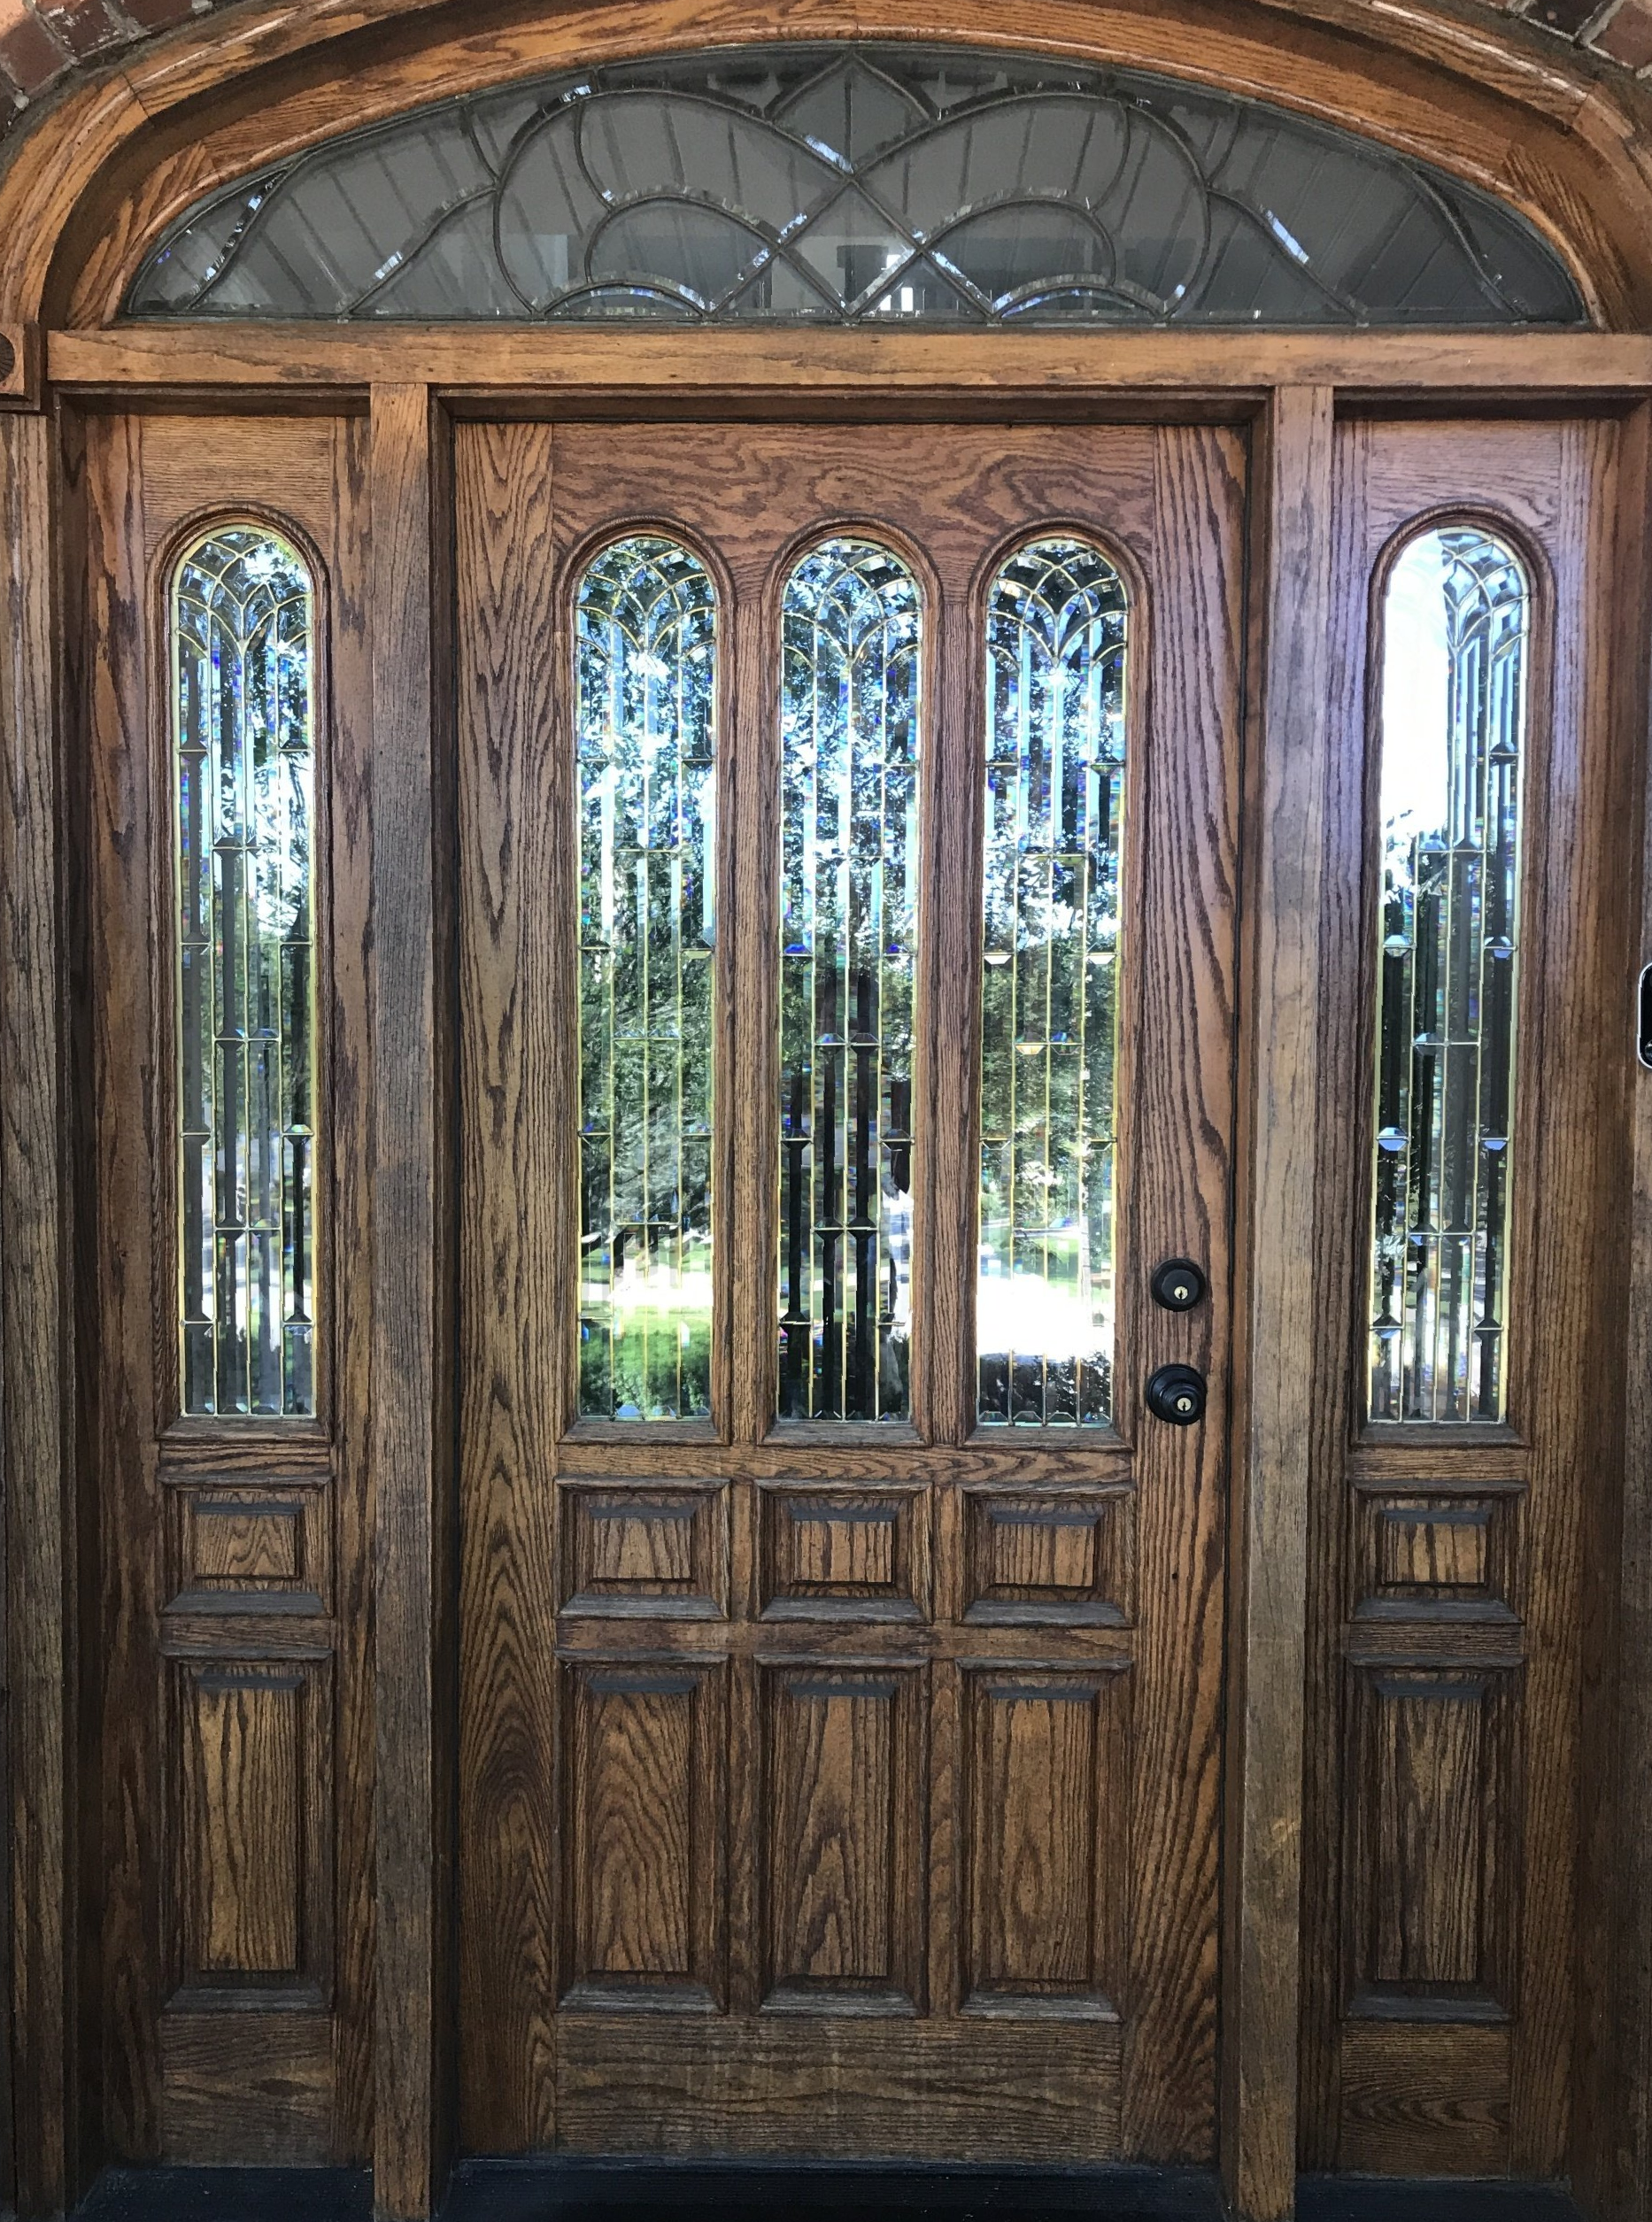 a large wooden door with stained glass windows